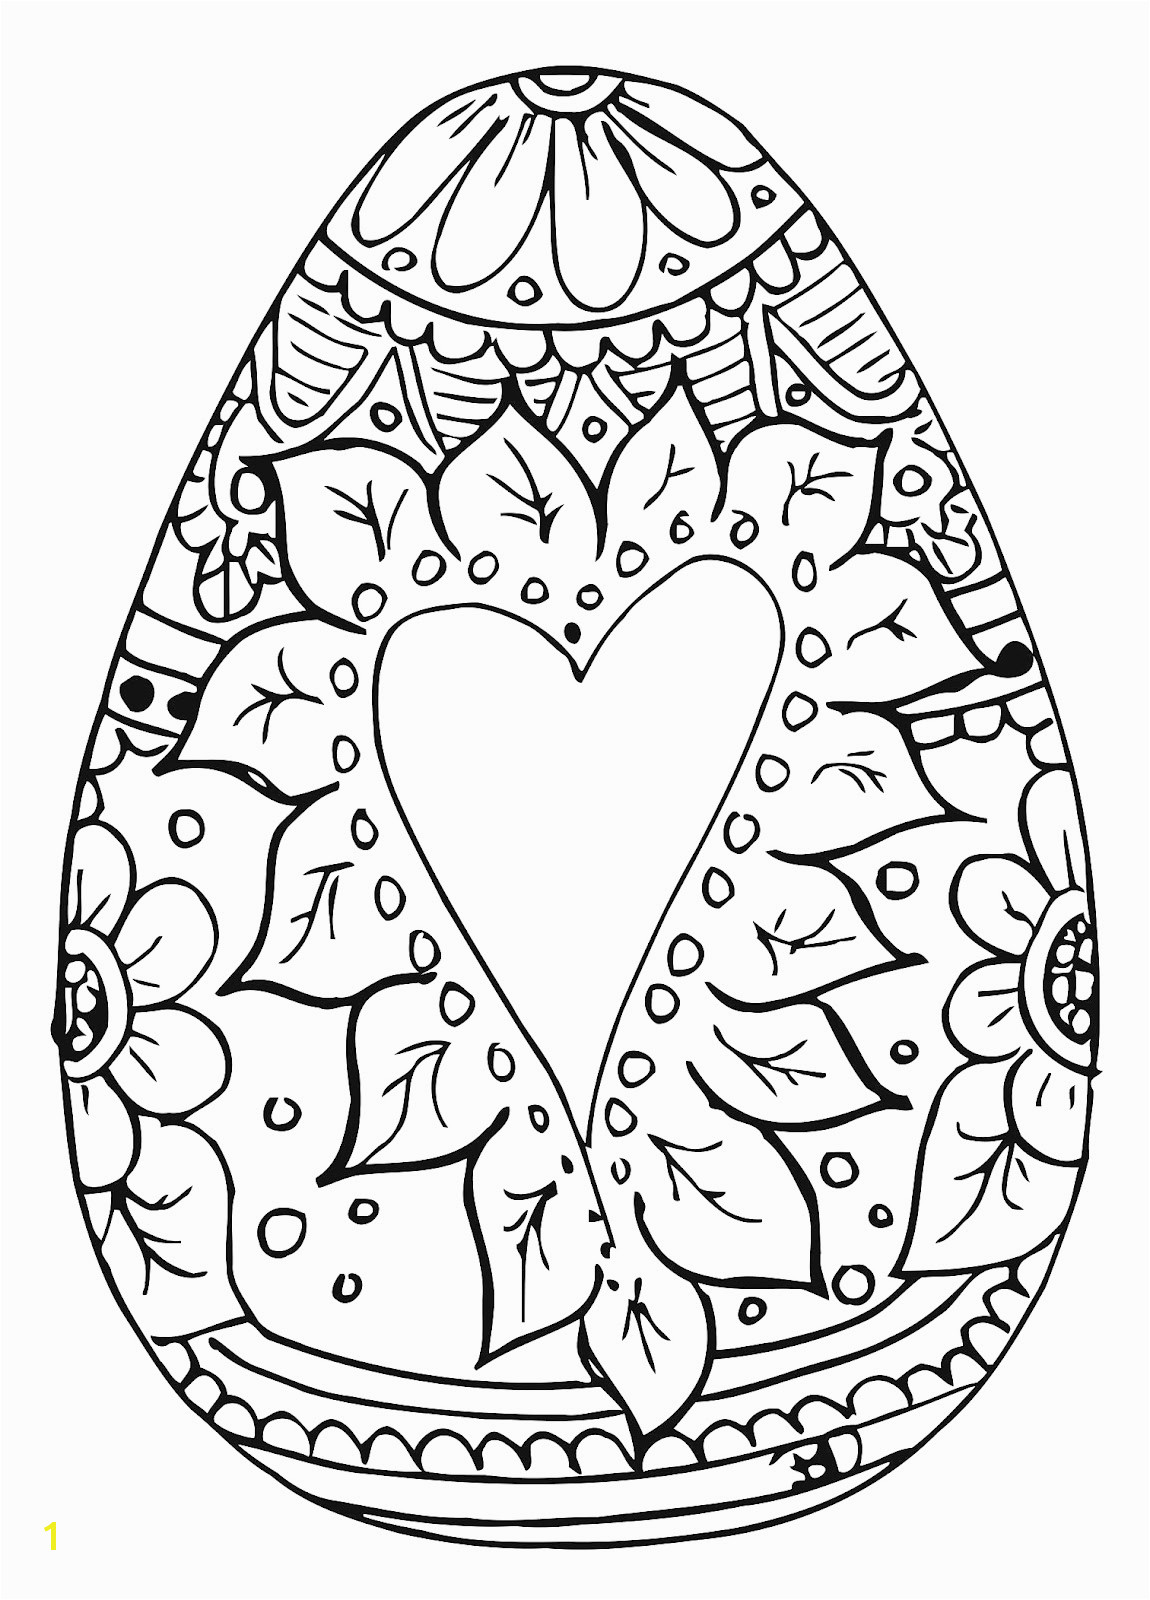 Easter Egg with Heart Coloring Page for Adults